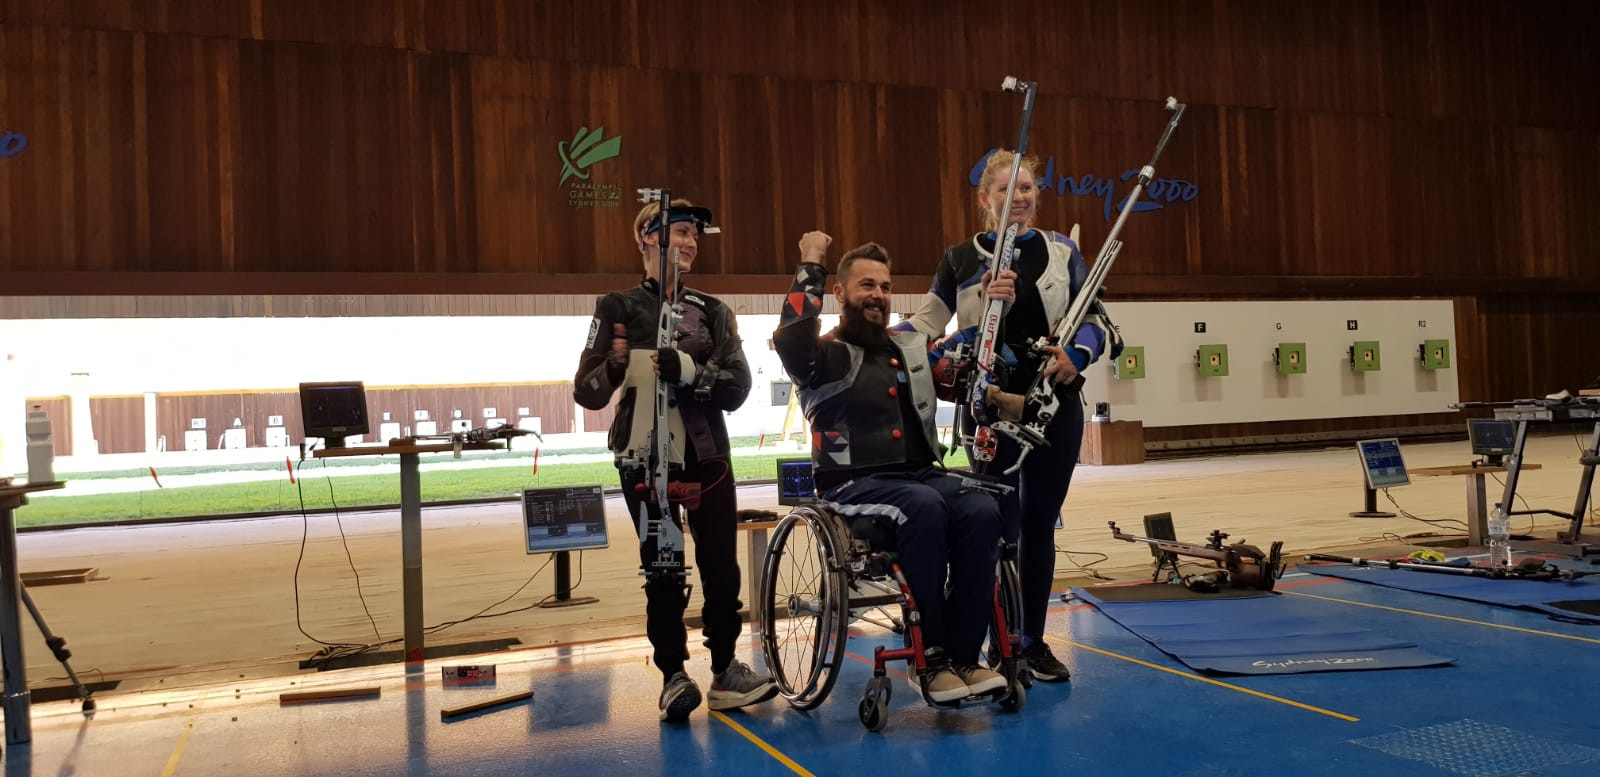 Skelhon secures second gold on final day of World Shooting Para Sport Championships